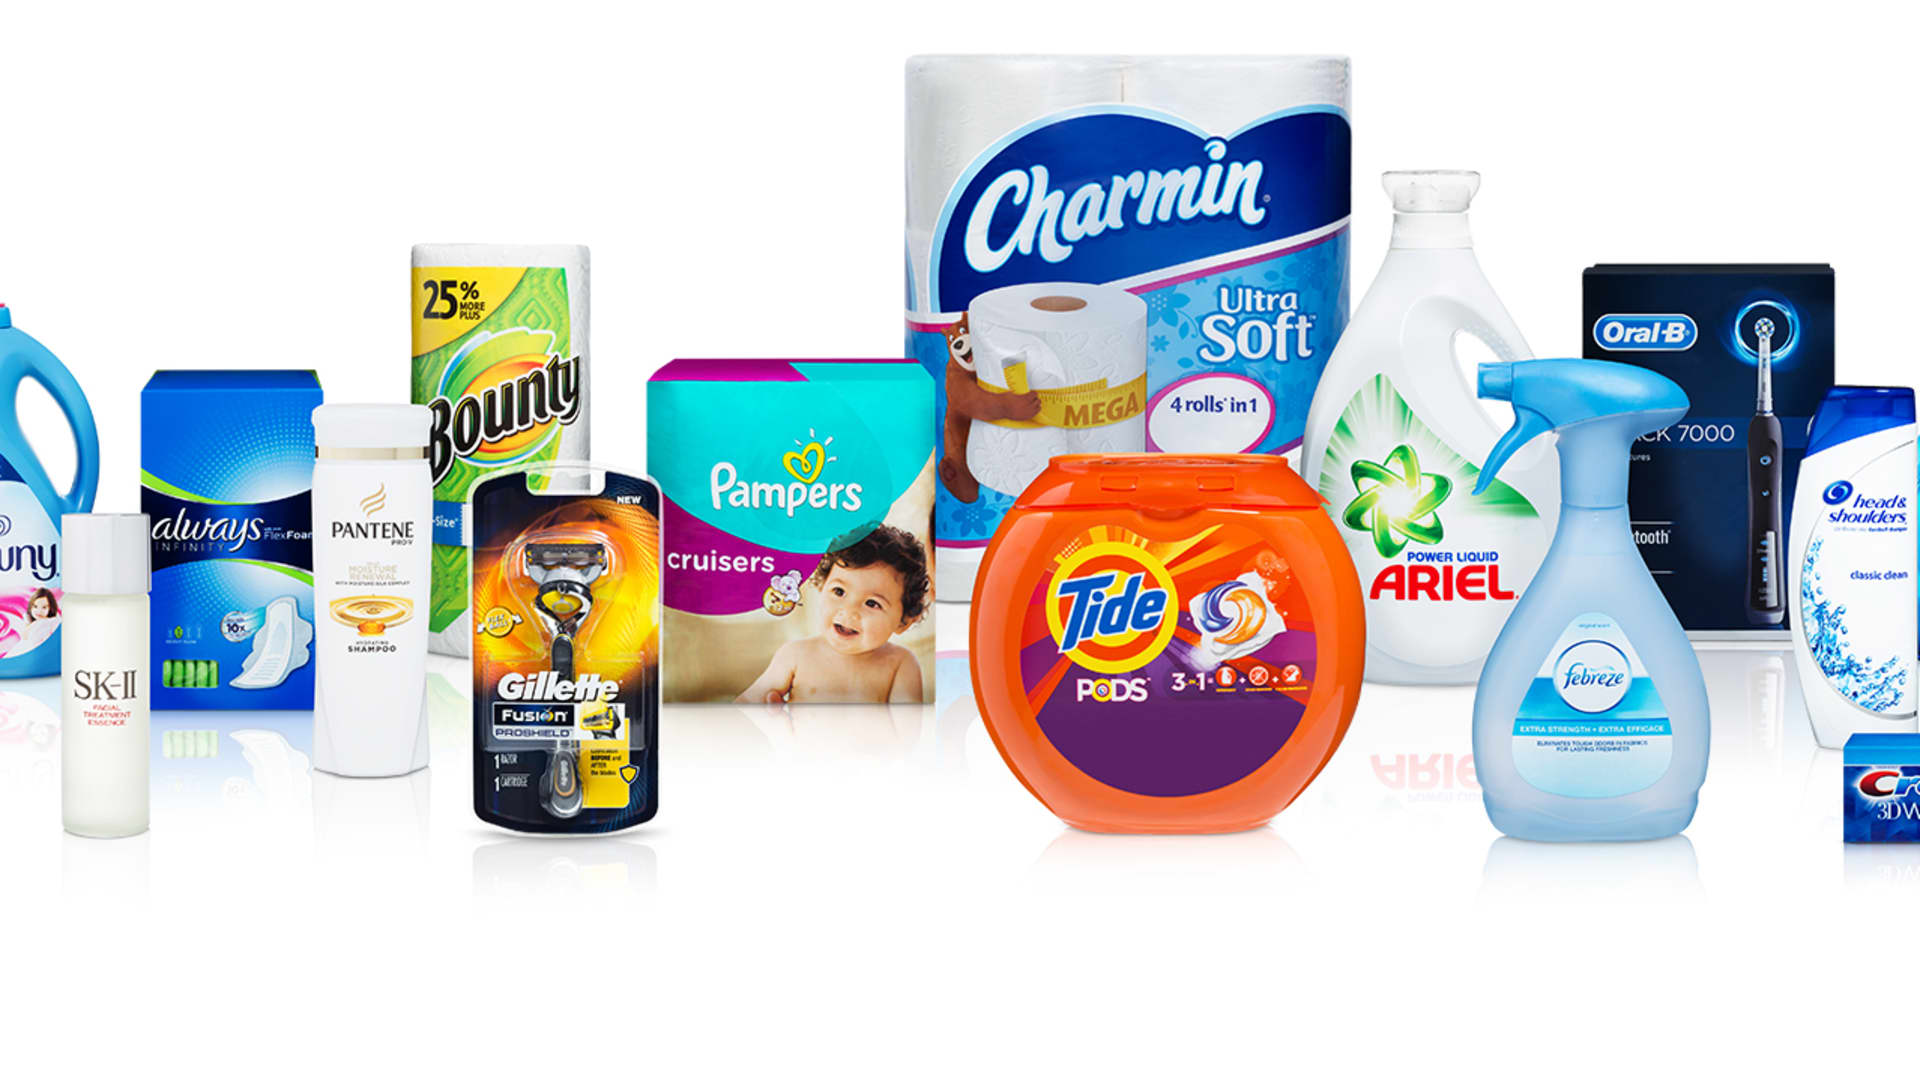 procter-gamble-saves-750-million-on-advertising-reduces-agencies